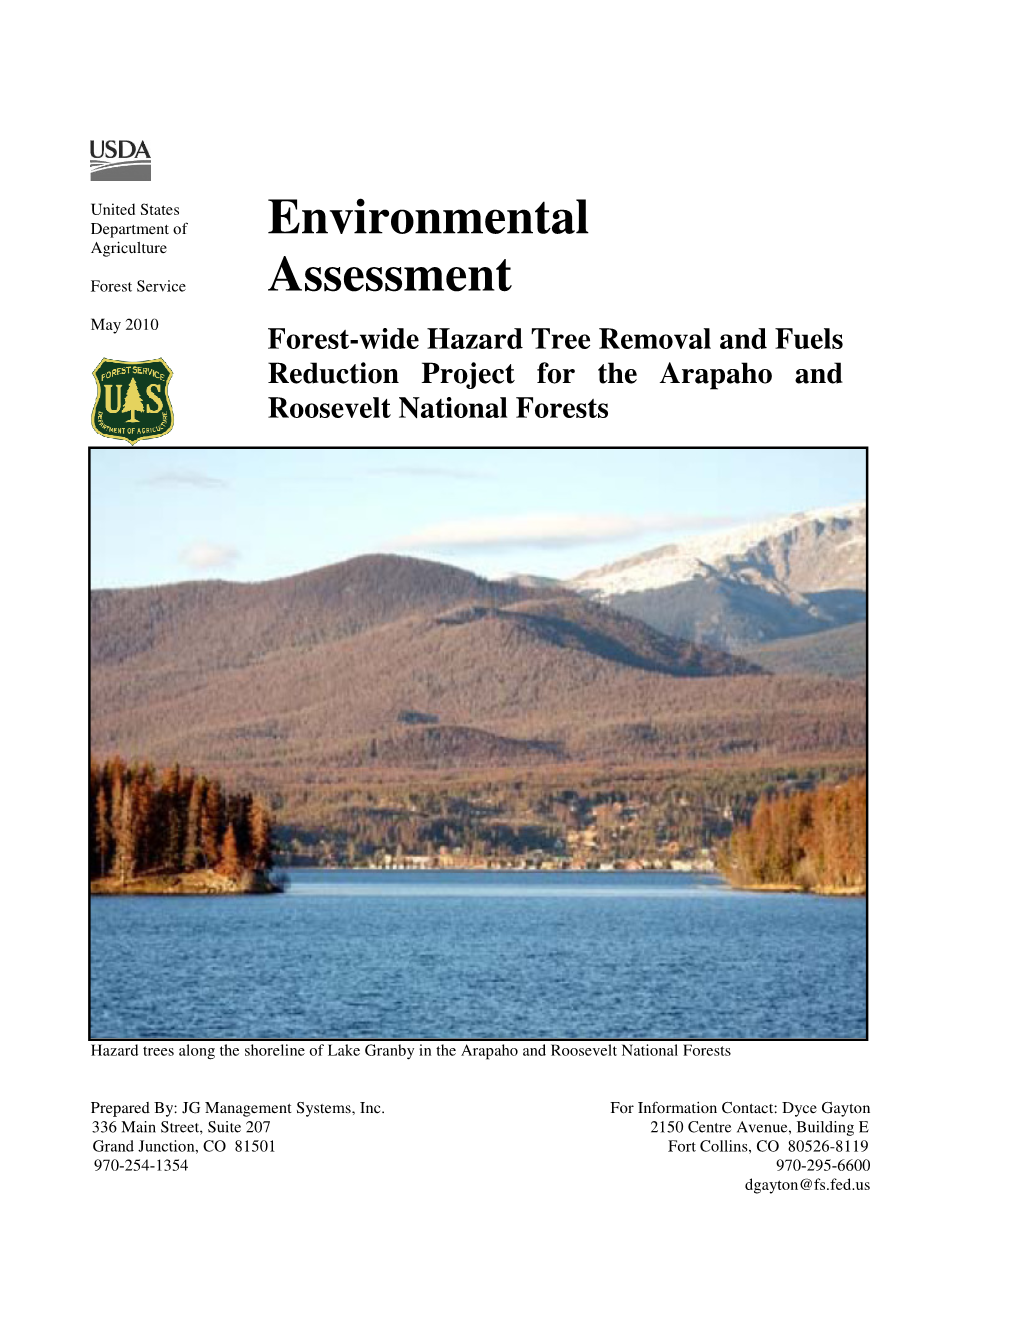 Environmental Assessment of the -Final- Forest-Wide Hazard Tree Removal and Fuels Reduction Project